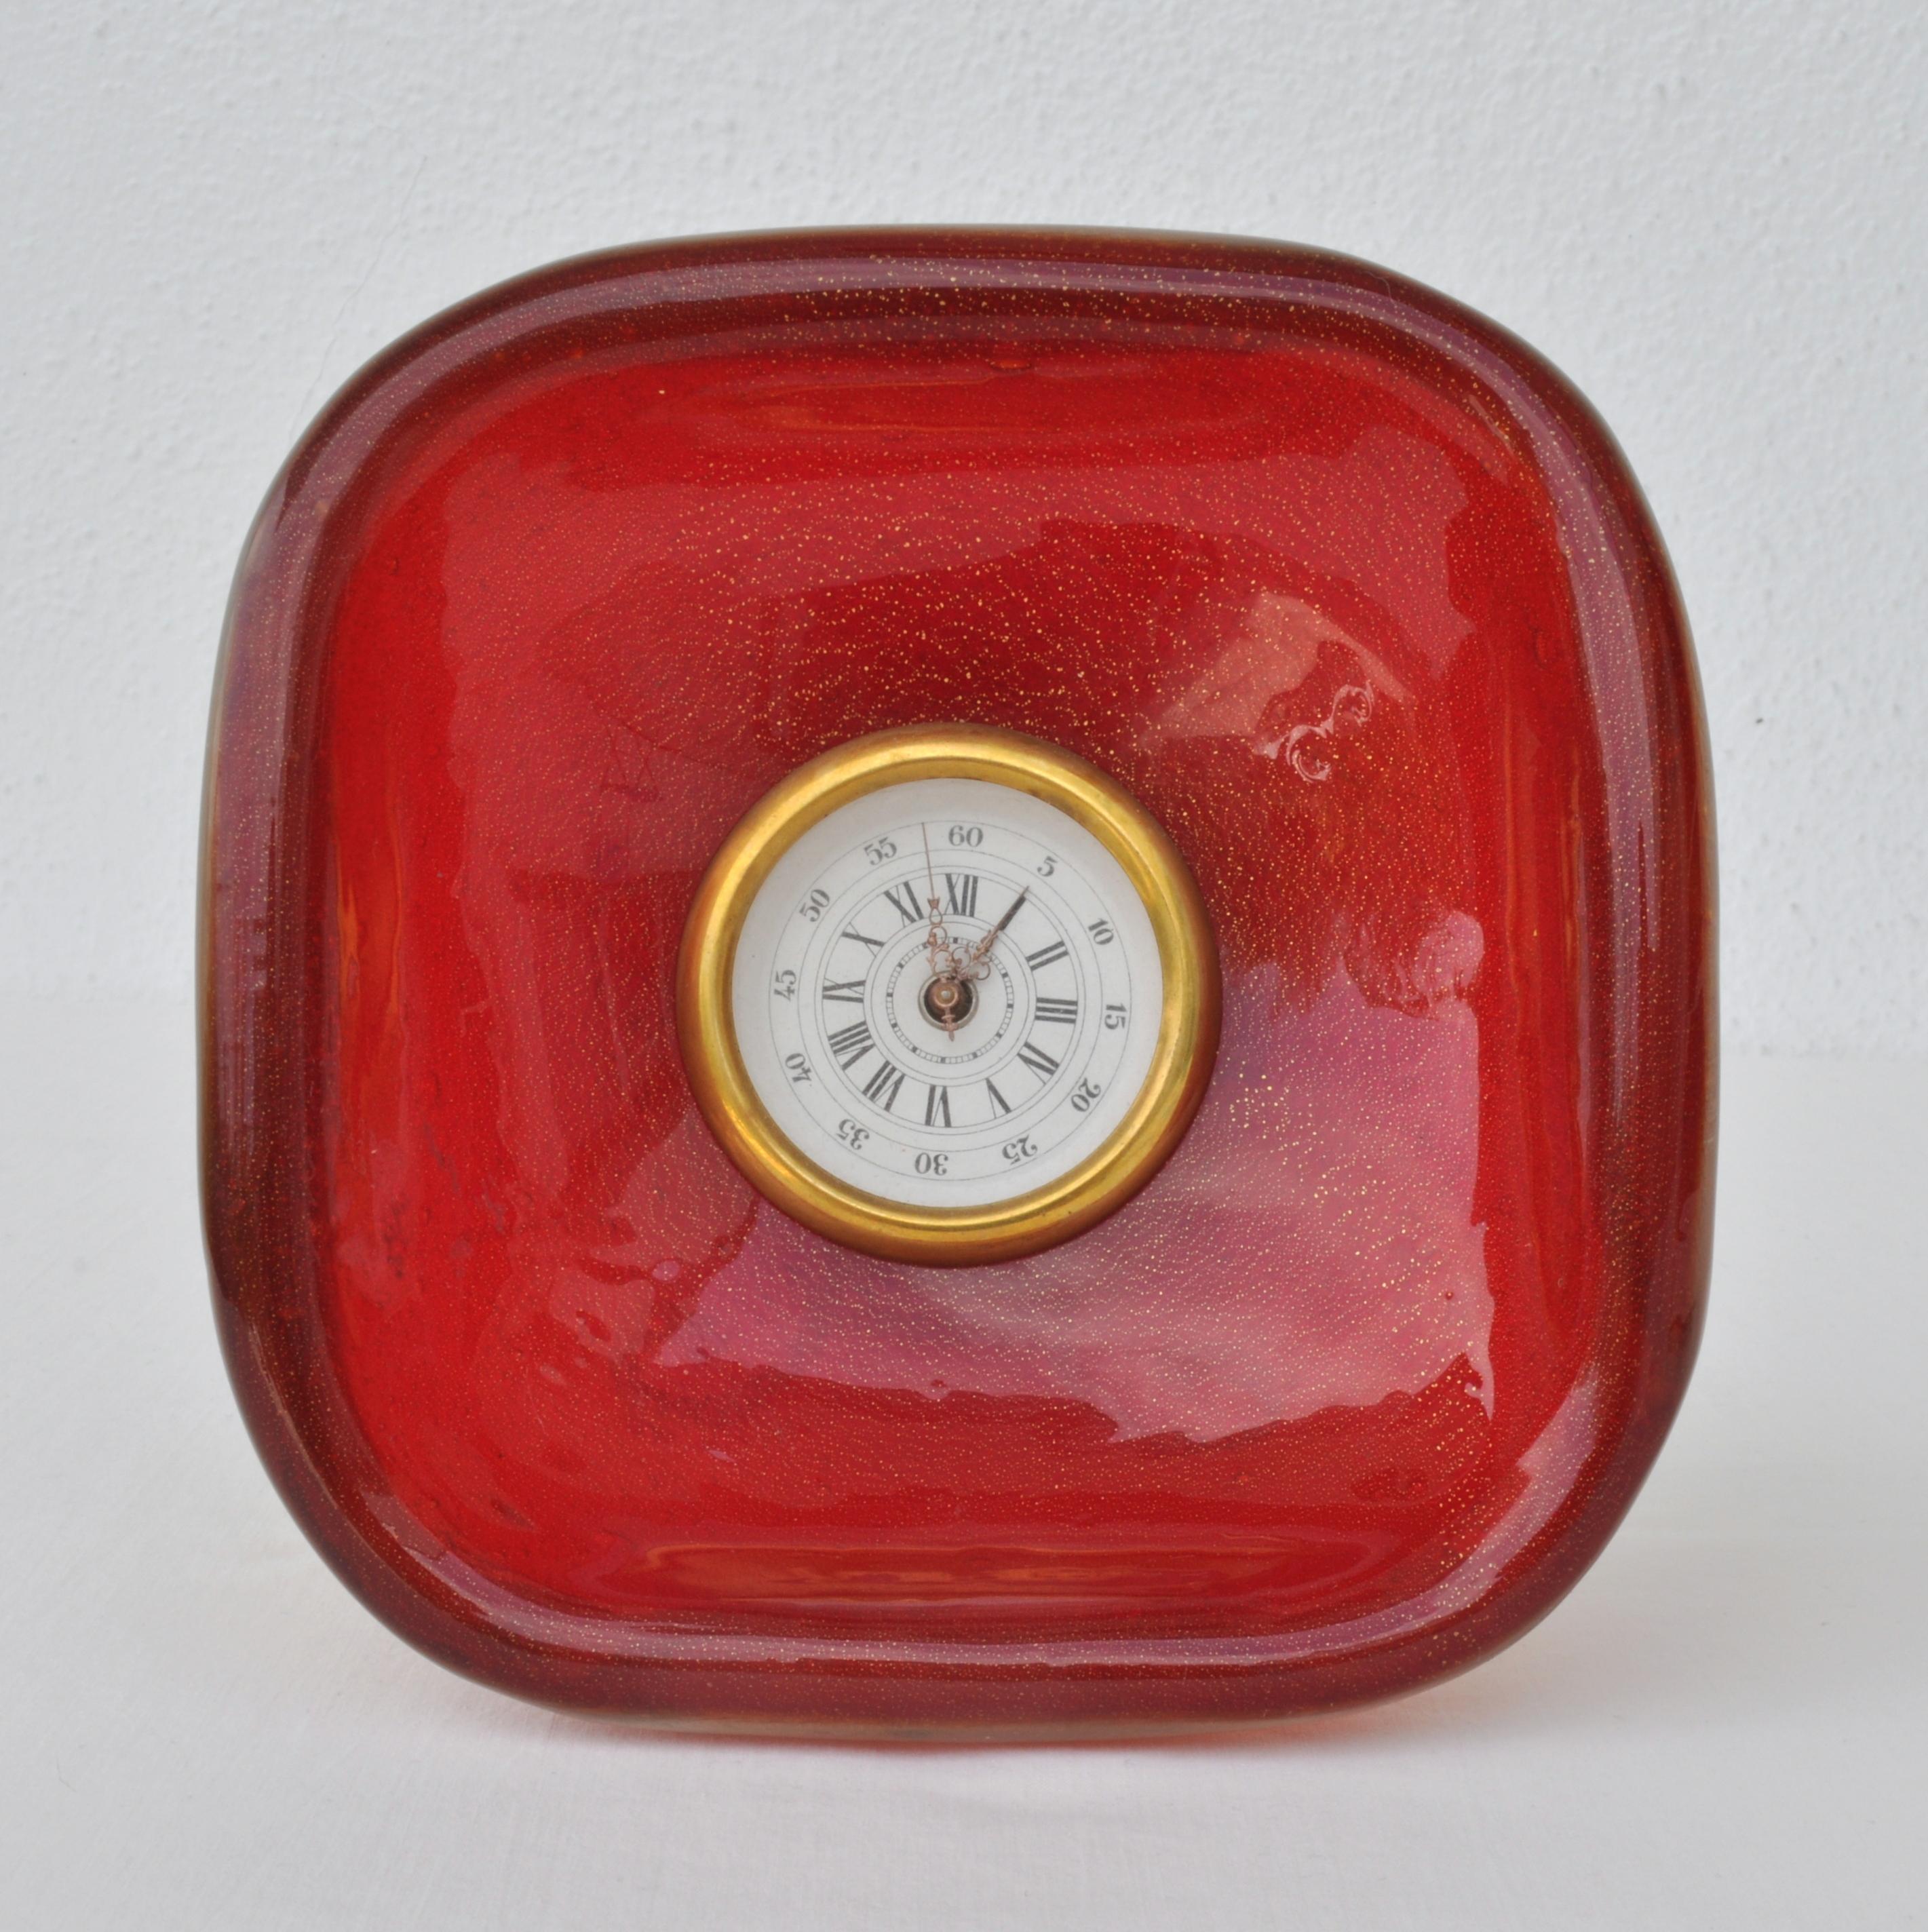 Layers of gold flake and red. The concave, square in form has rounded corners. The clock with original wind up clock inserted
On a brass stand. The position makes the color rich because the light goes through it.

Square concave Somerso table